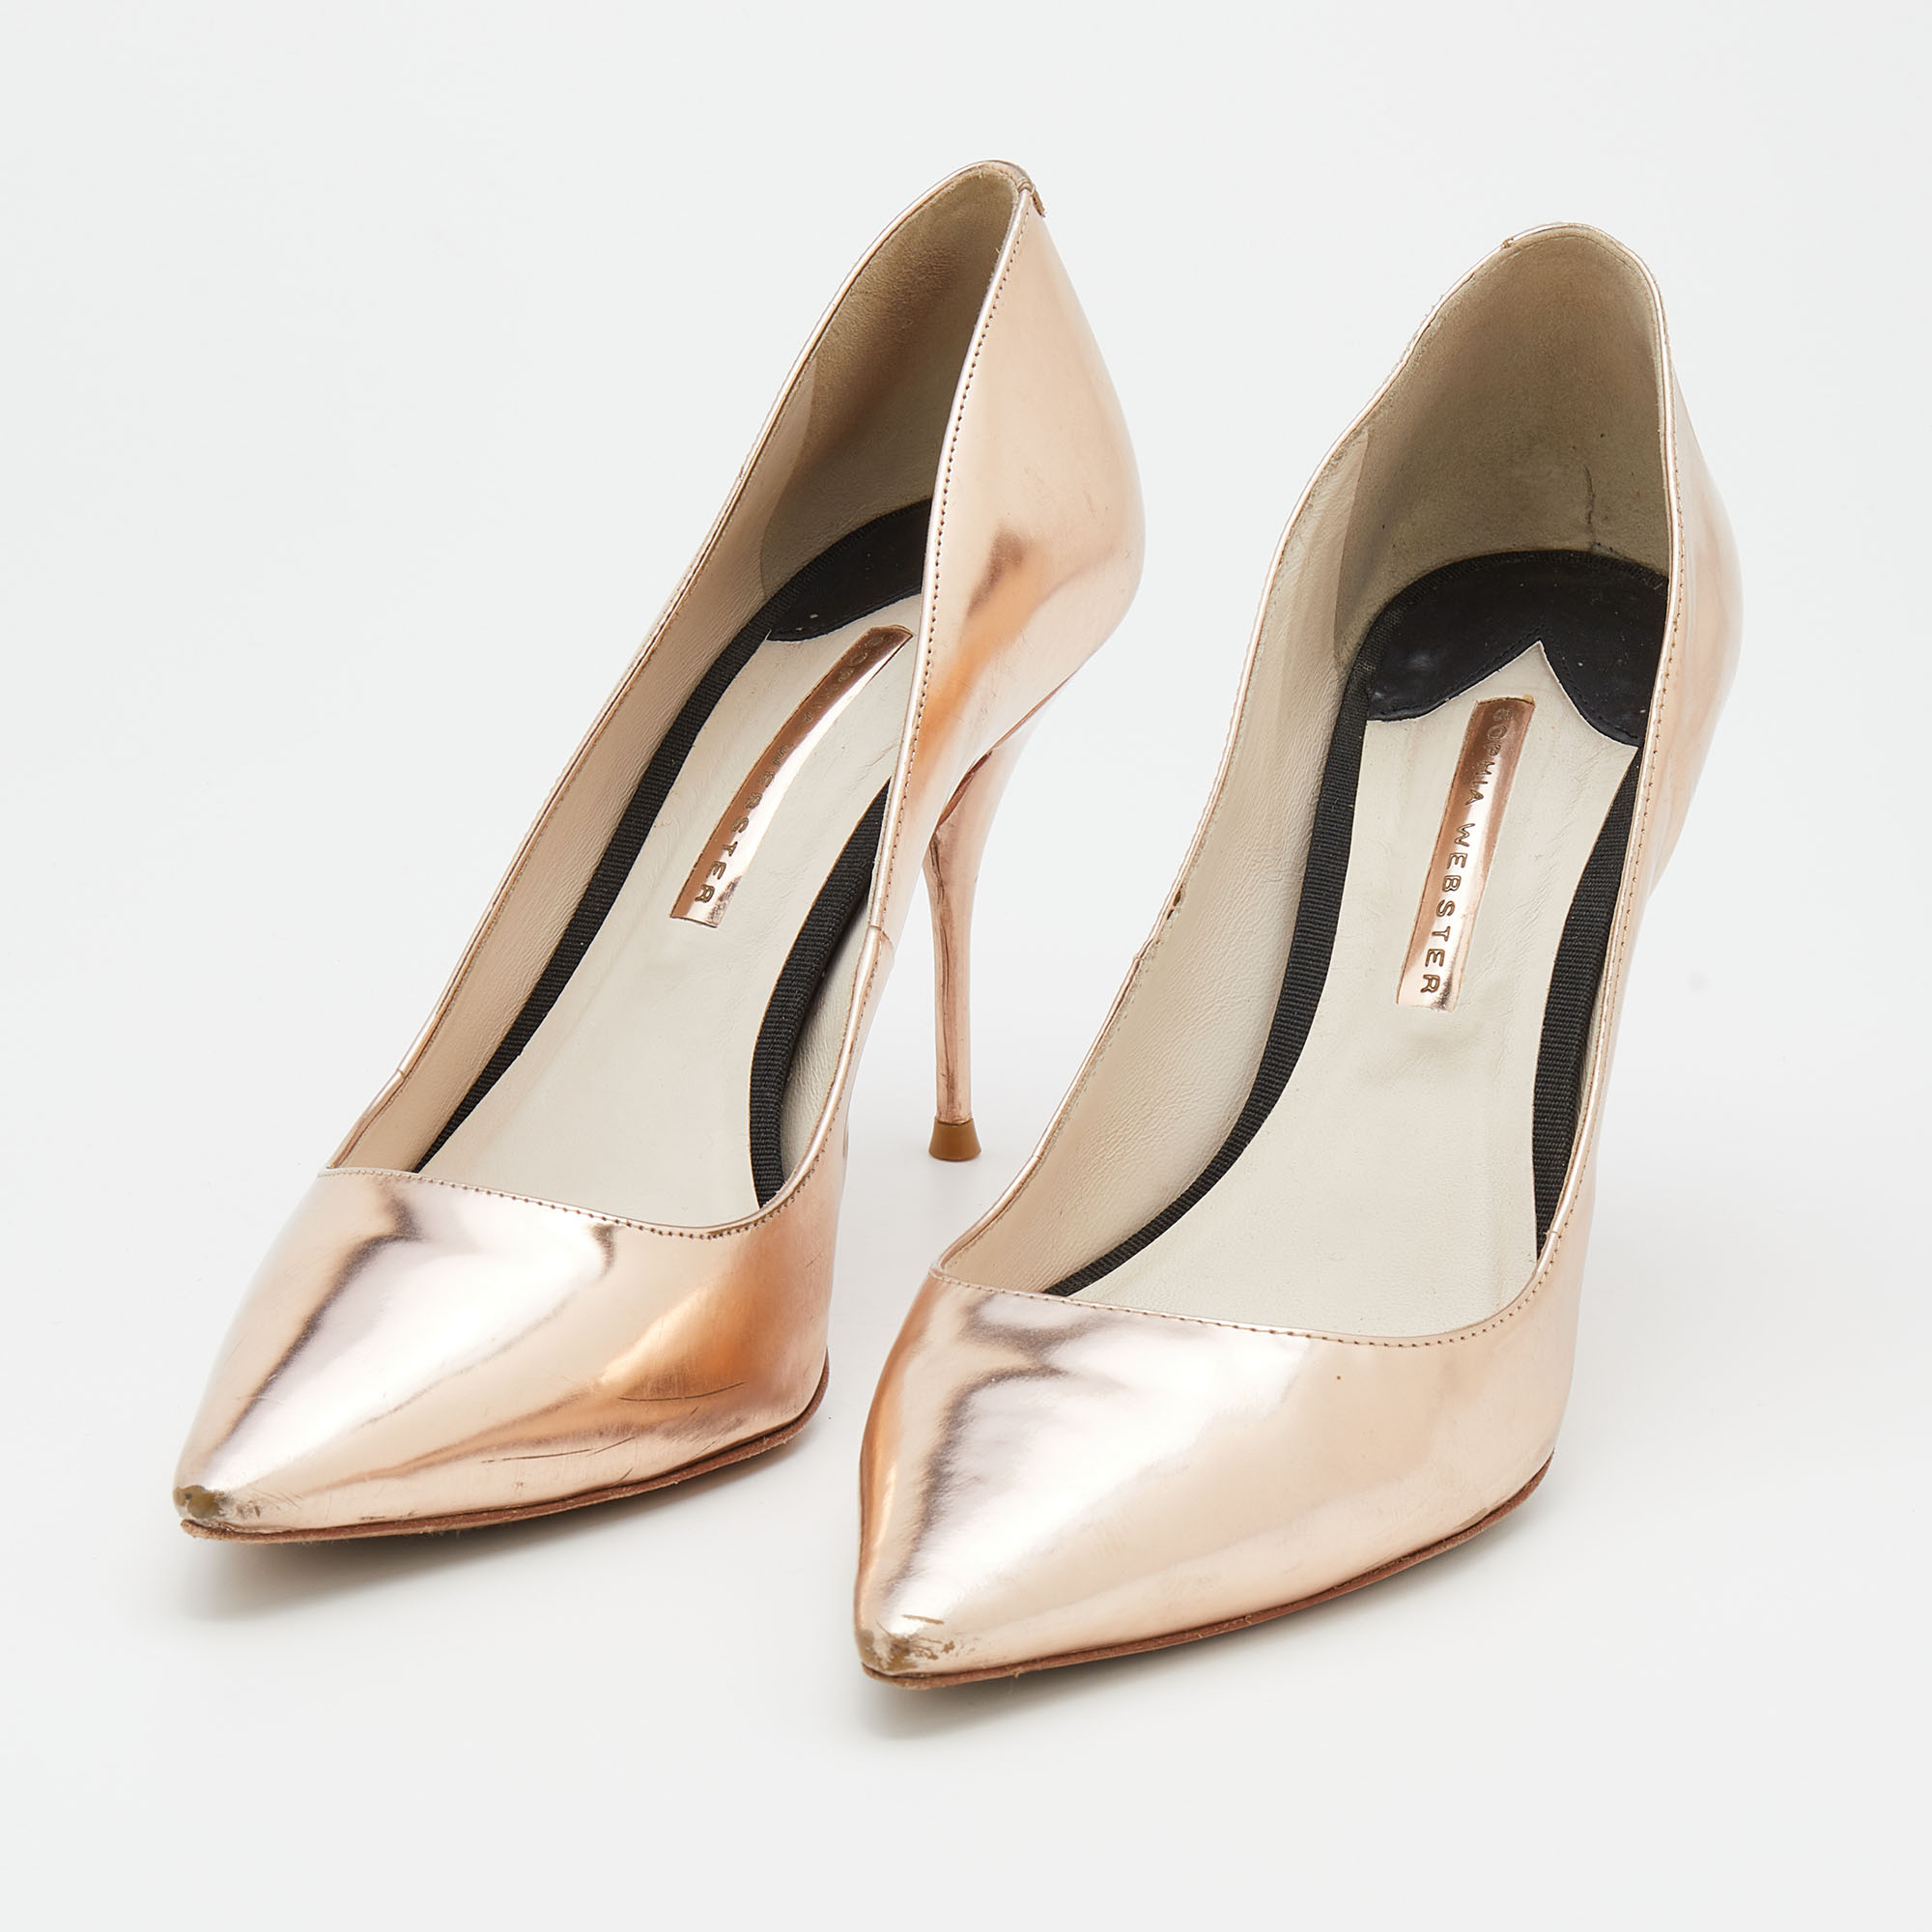 

Sophia Webster Metallic Rose Gold Leather Coco Flamingo Pointed Toe Pumps Size